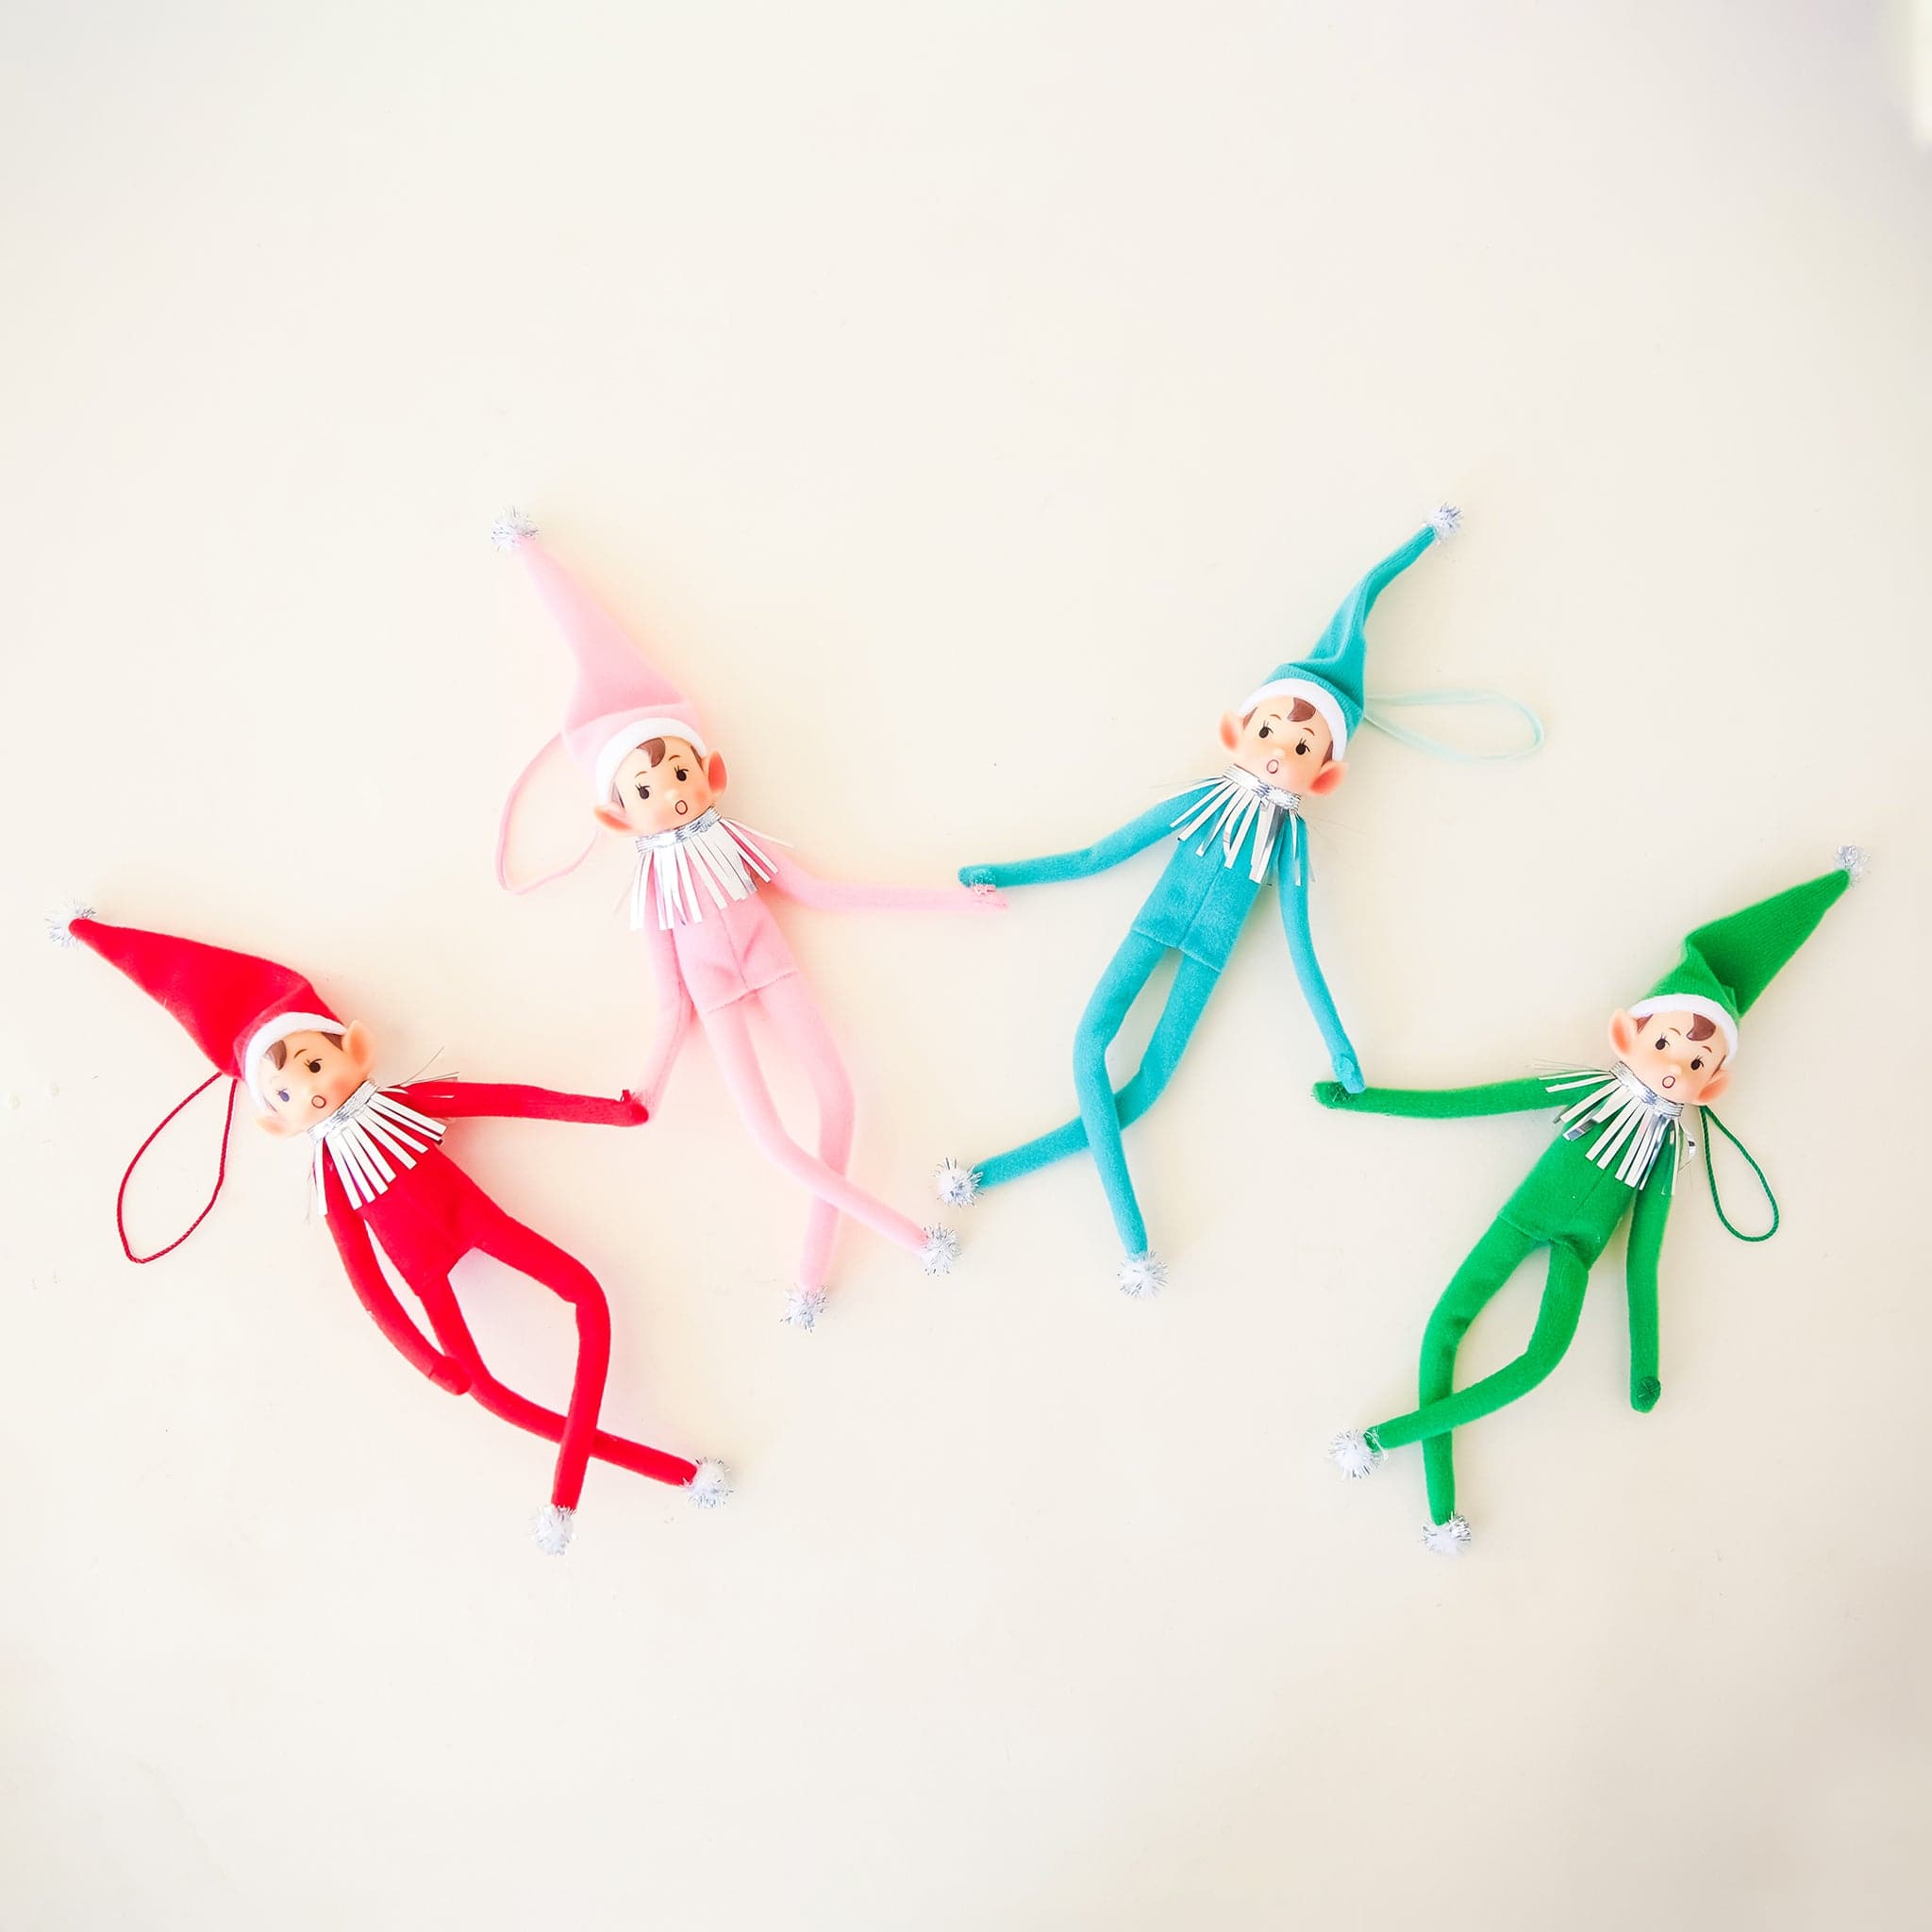 On a cream background is a pink elf ornament with bendy arms and legs and a pink loop for hanging and photographed next to the other three available colors, red, green and teal. 